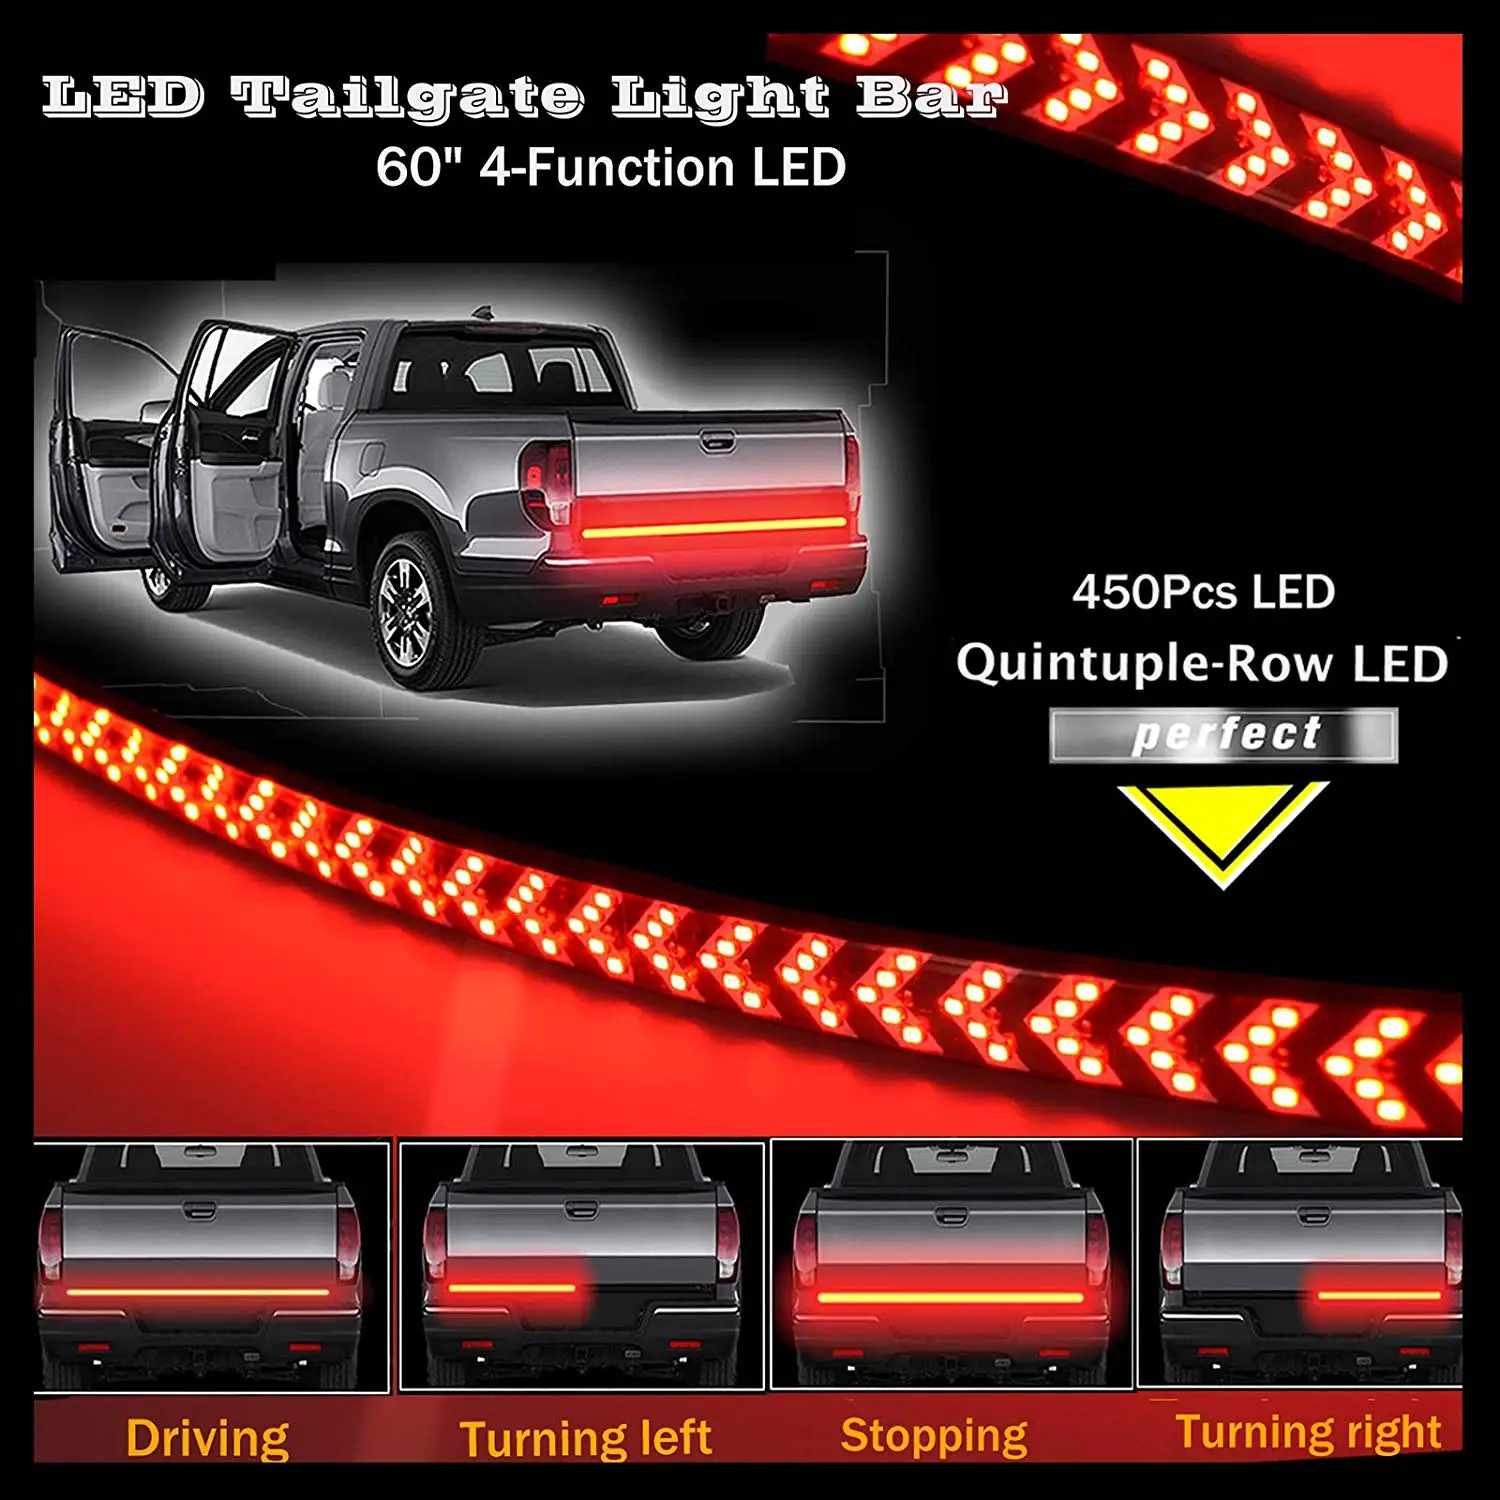 LED Tailgate Light Bar 60inch Strip with Directional Arrow Running/Parking Light/Sequential Turn Signal/Brake Light 450pcs Led